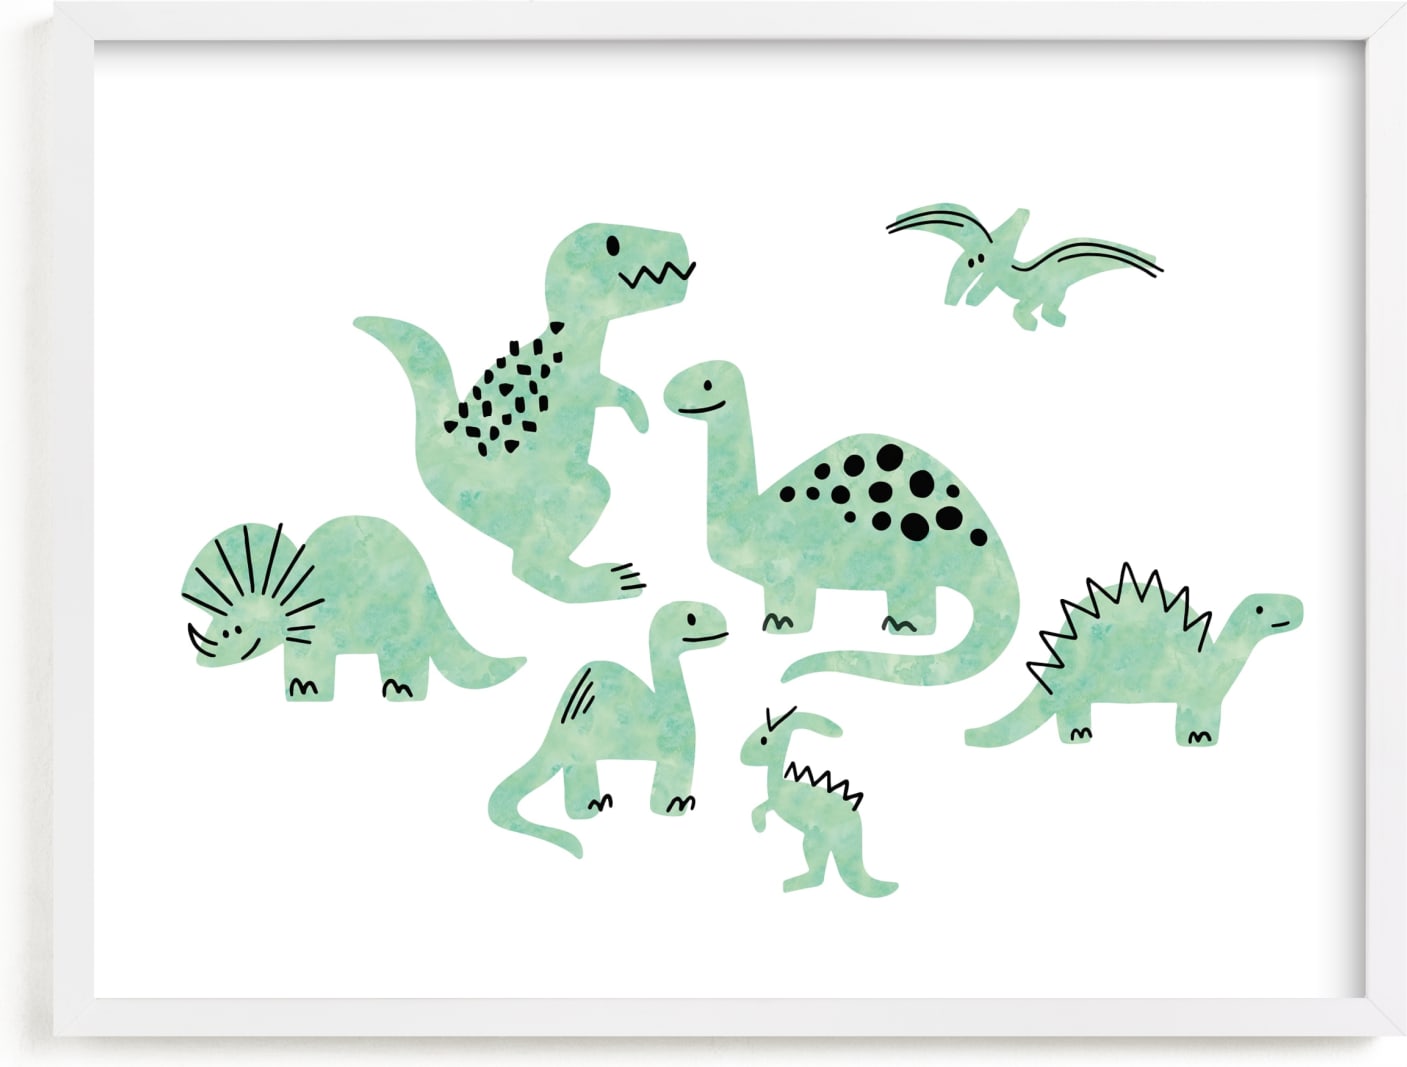 This is a green kids wall art by Jessie Steury called Darling Dinos.